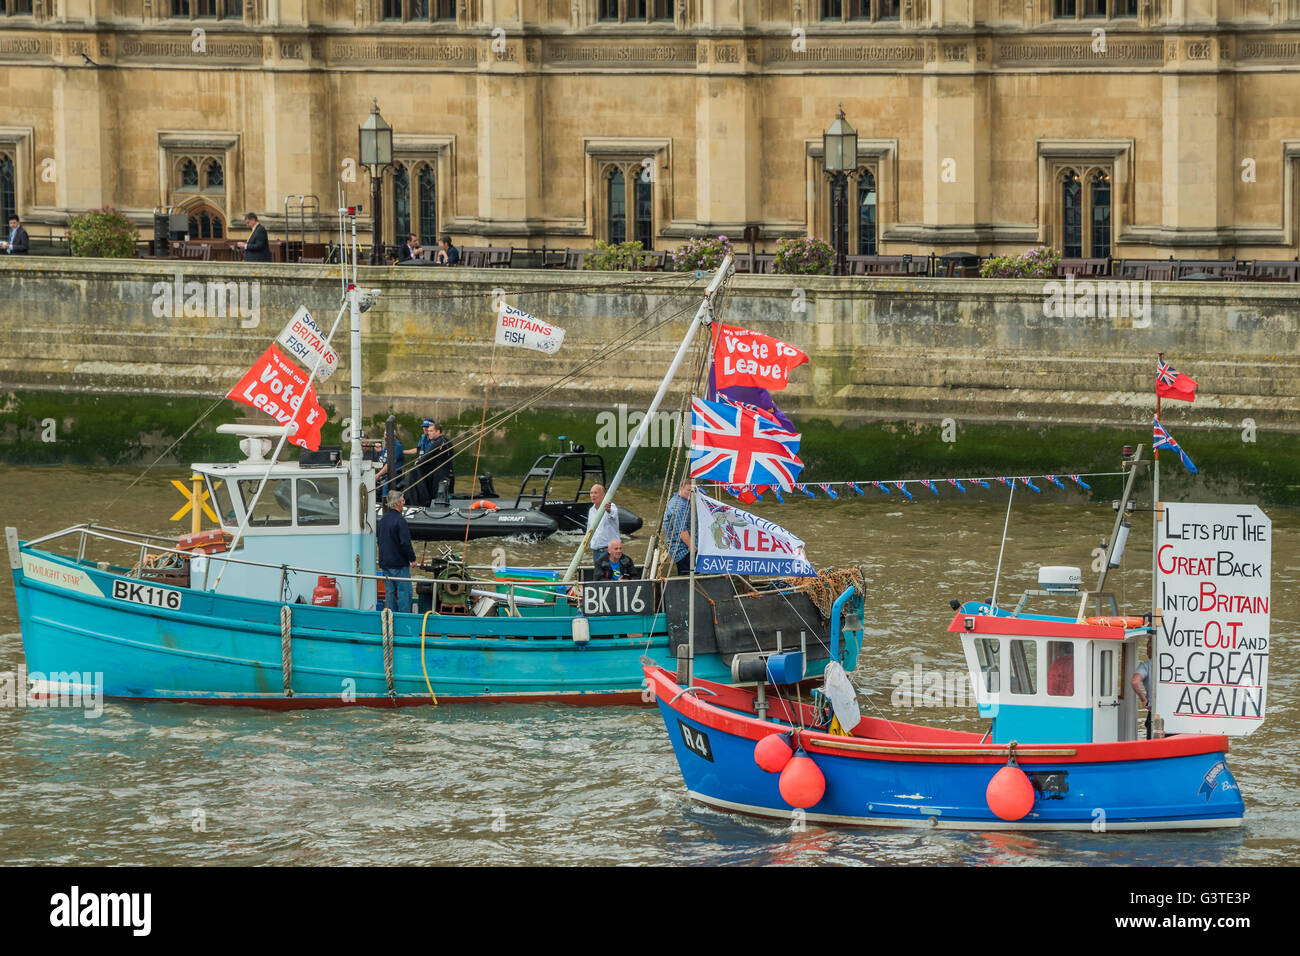 London, UK. 15th June, 2016. Nigel Farage, the leader of Ukip, joins a flotilla of fishing trawlers up the Thames to Parliament to call for the UK’s withdrawal from the EU, in a protest timed to coincide with prime minister’s questions. Credit:  Guy Bell/Alamy Live News Stock Photo